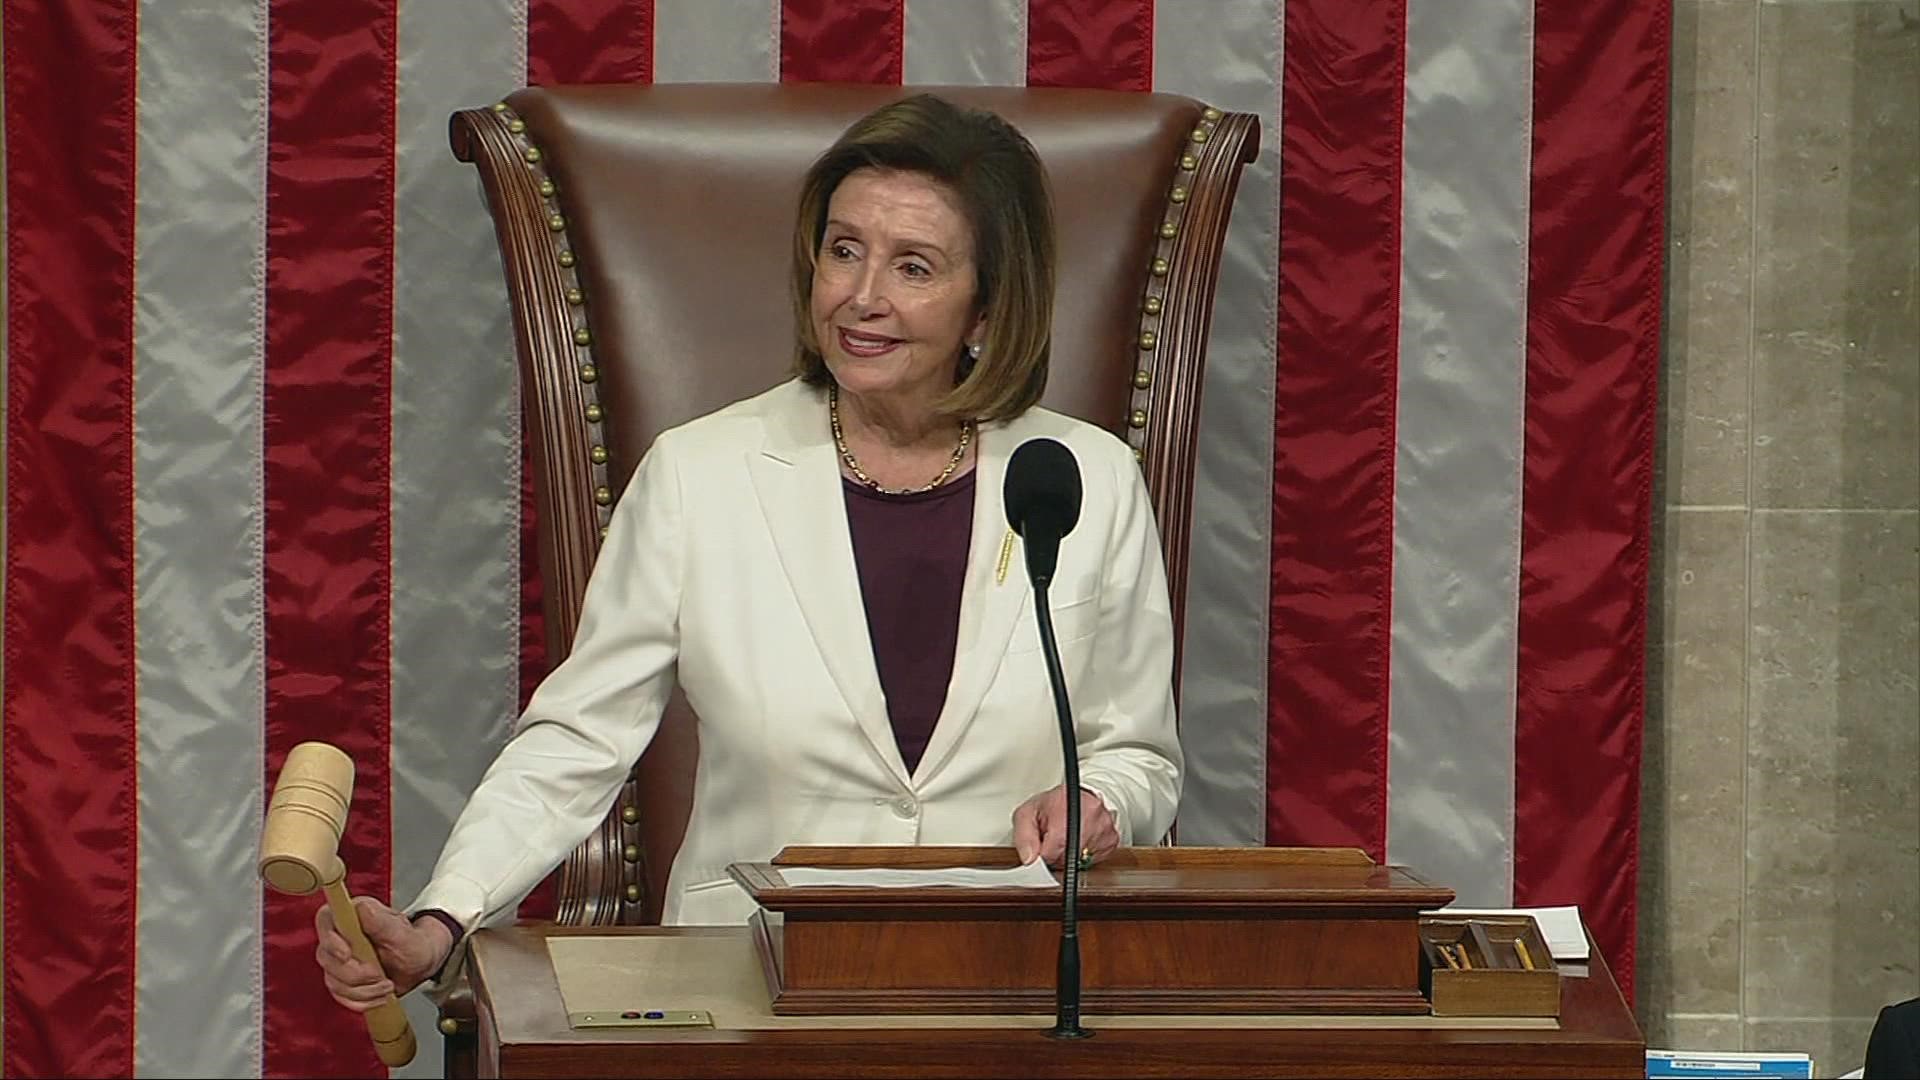 It’s the end of an era. After two decades, House Speaker Nancy Pelosi announcing she will step down from a Democratic leadership role.